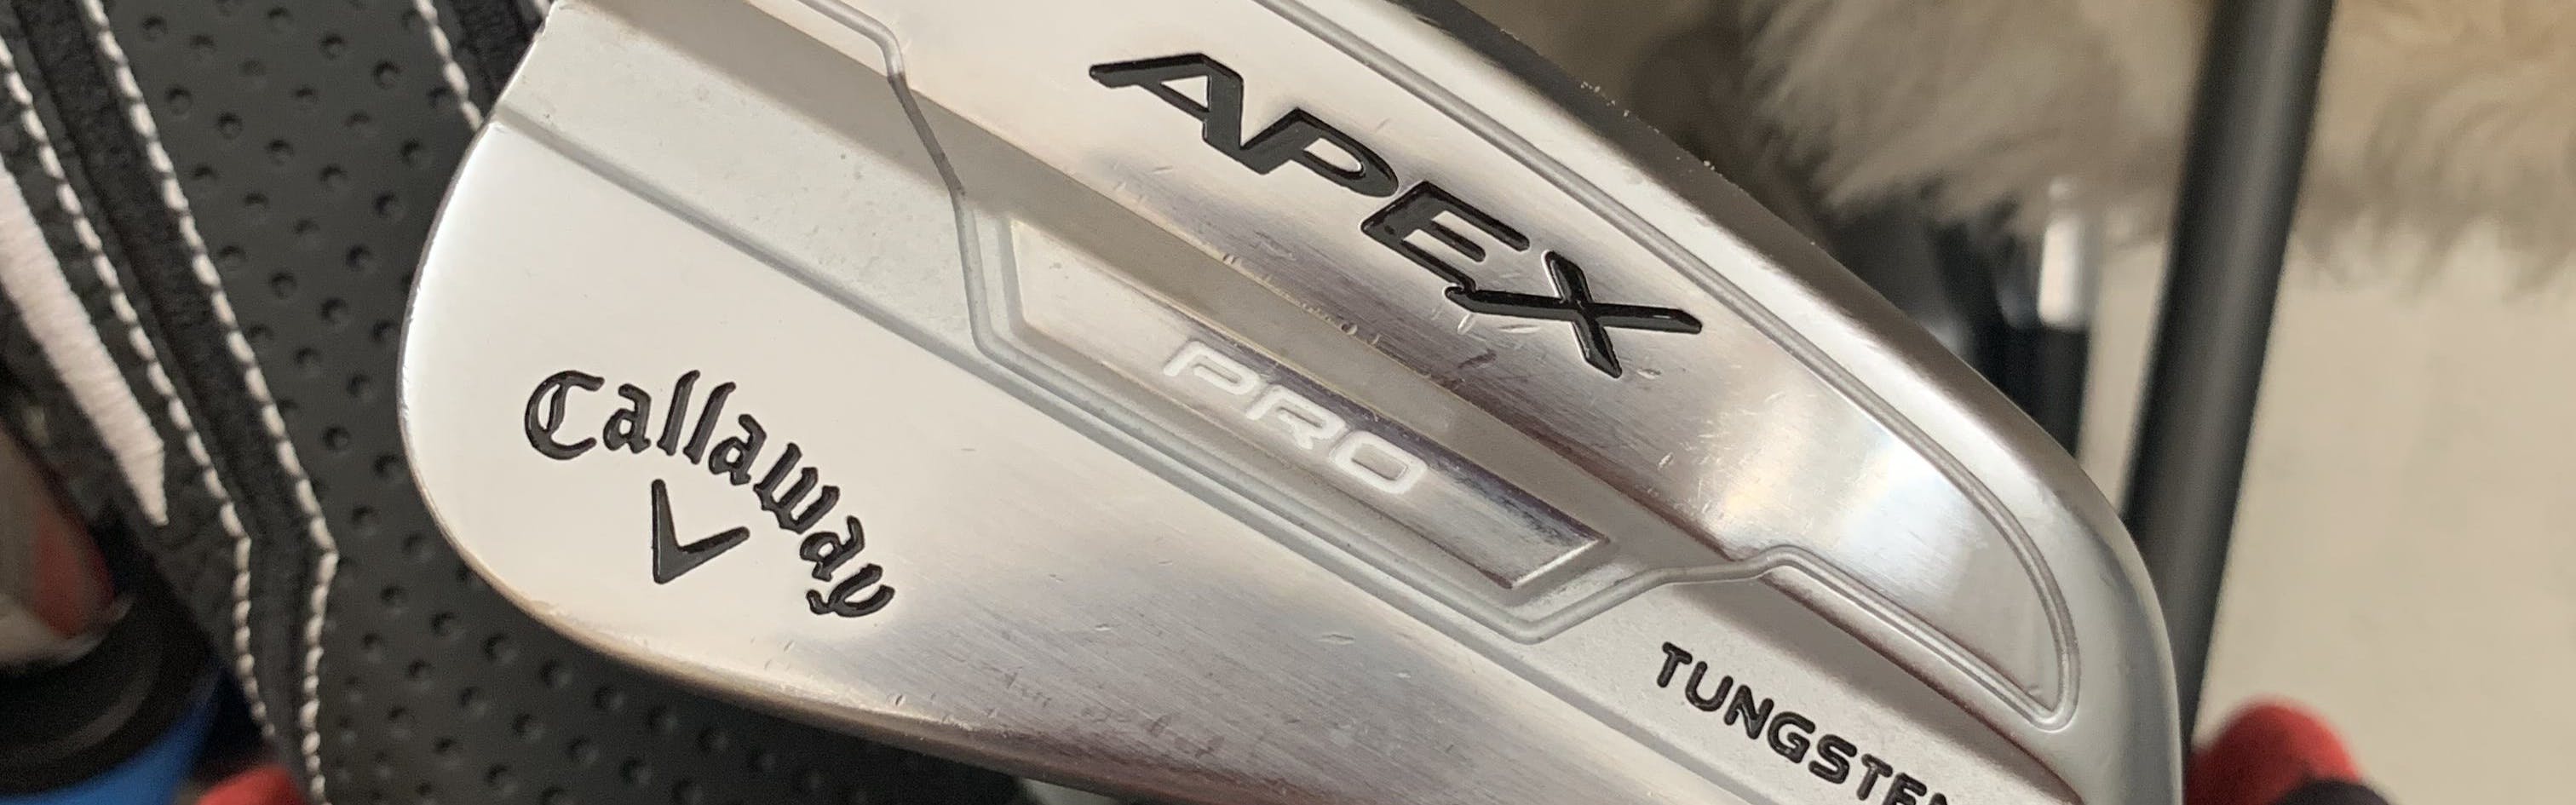 Expert Review: Callaway Apex Pro 2021 Irons | Curated.com